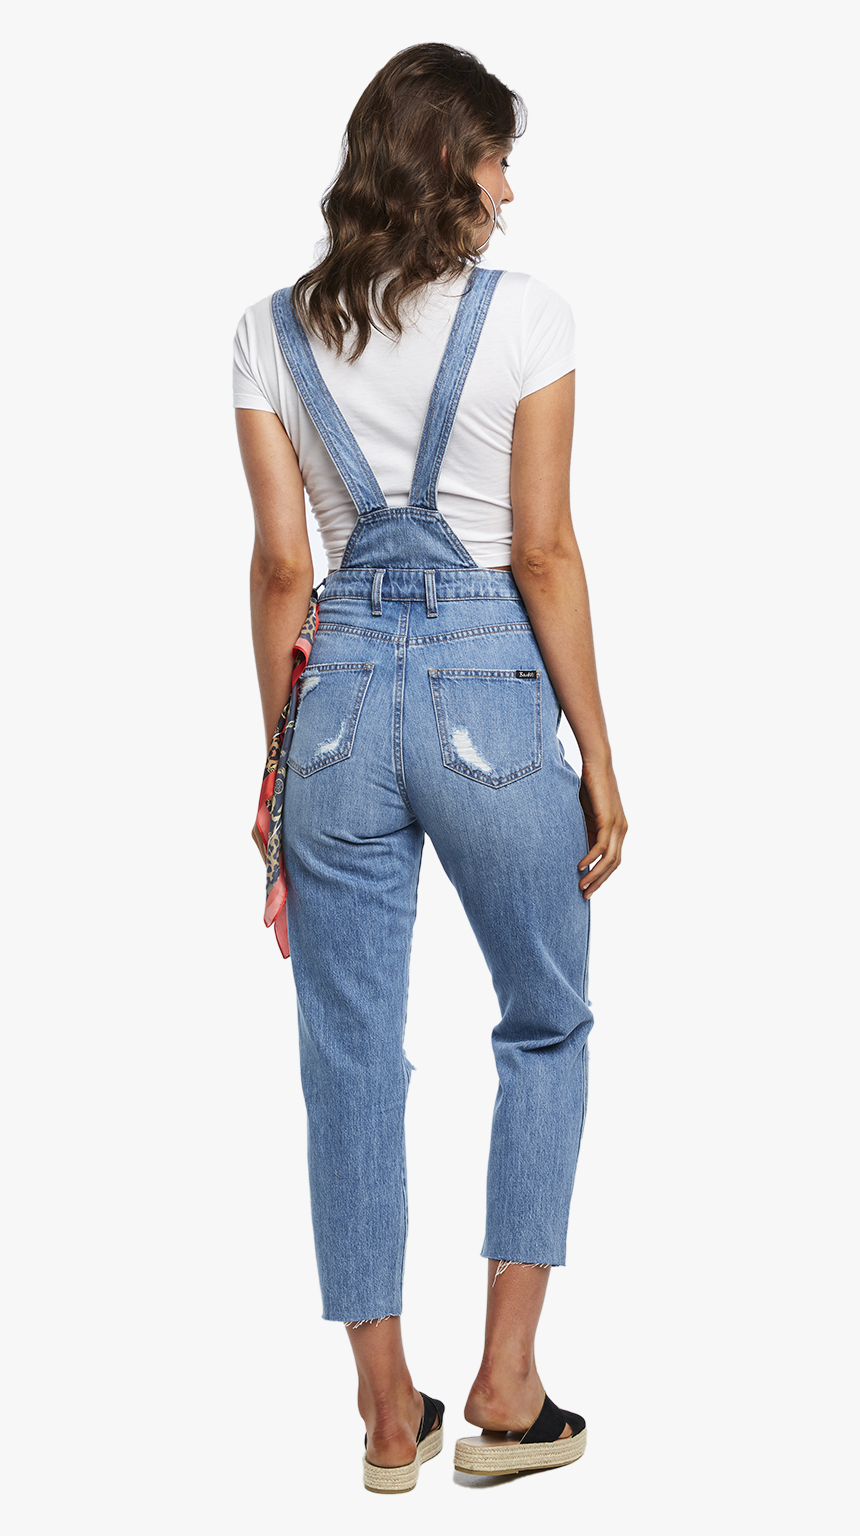 Denim Dungaree In Colour Citadel - One-piece Garment, HD Png Download, Free Download